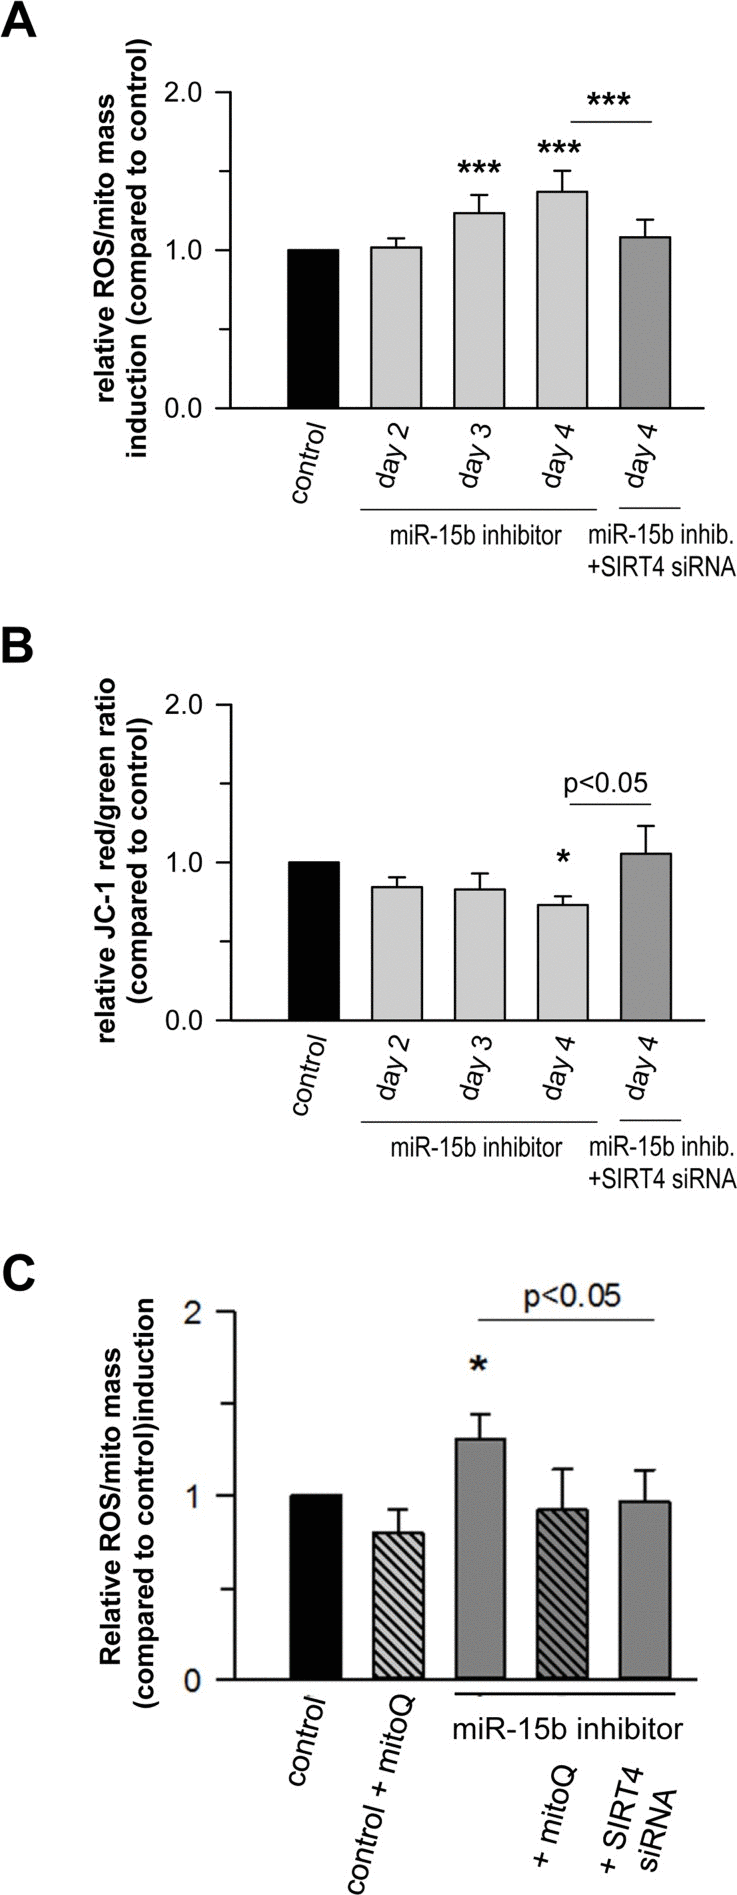 Mir-15b regulates mitochondrial ROS generation and the mitochondrial membrane potential in a SIRT4-dependent manner in primary human dermal fibroblasts